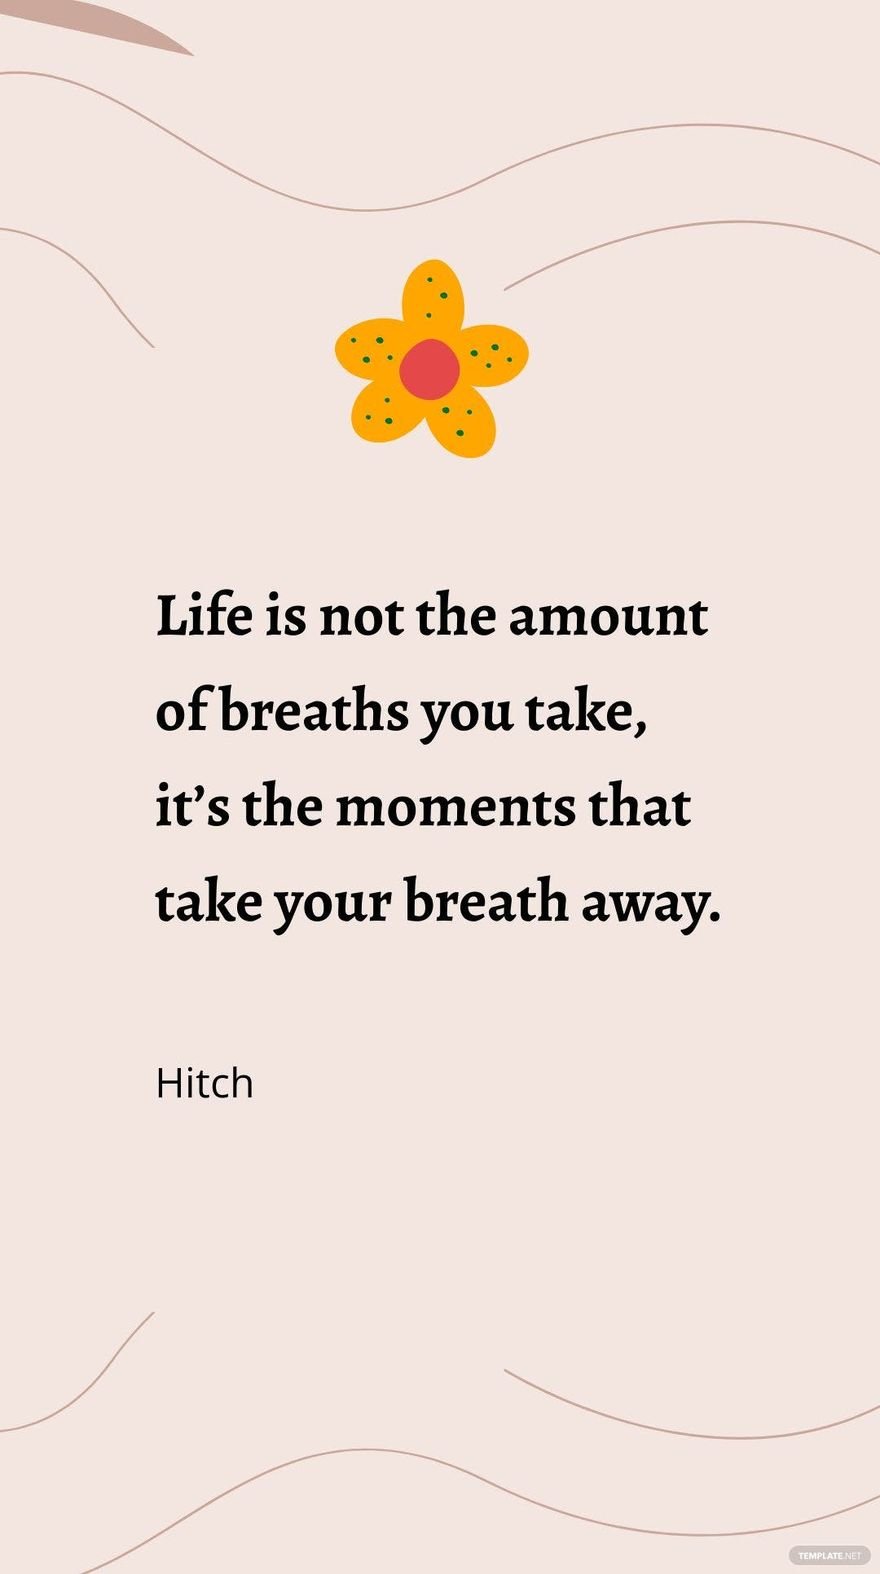 Hitch - “Life is not the amount of breaths you take, it’s the moments that take your breath away.”